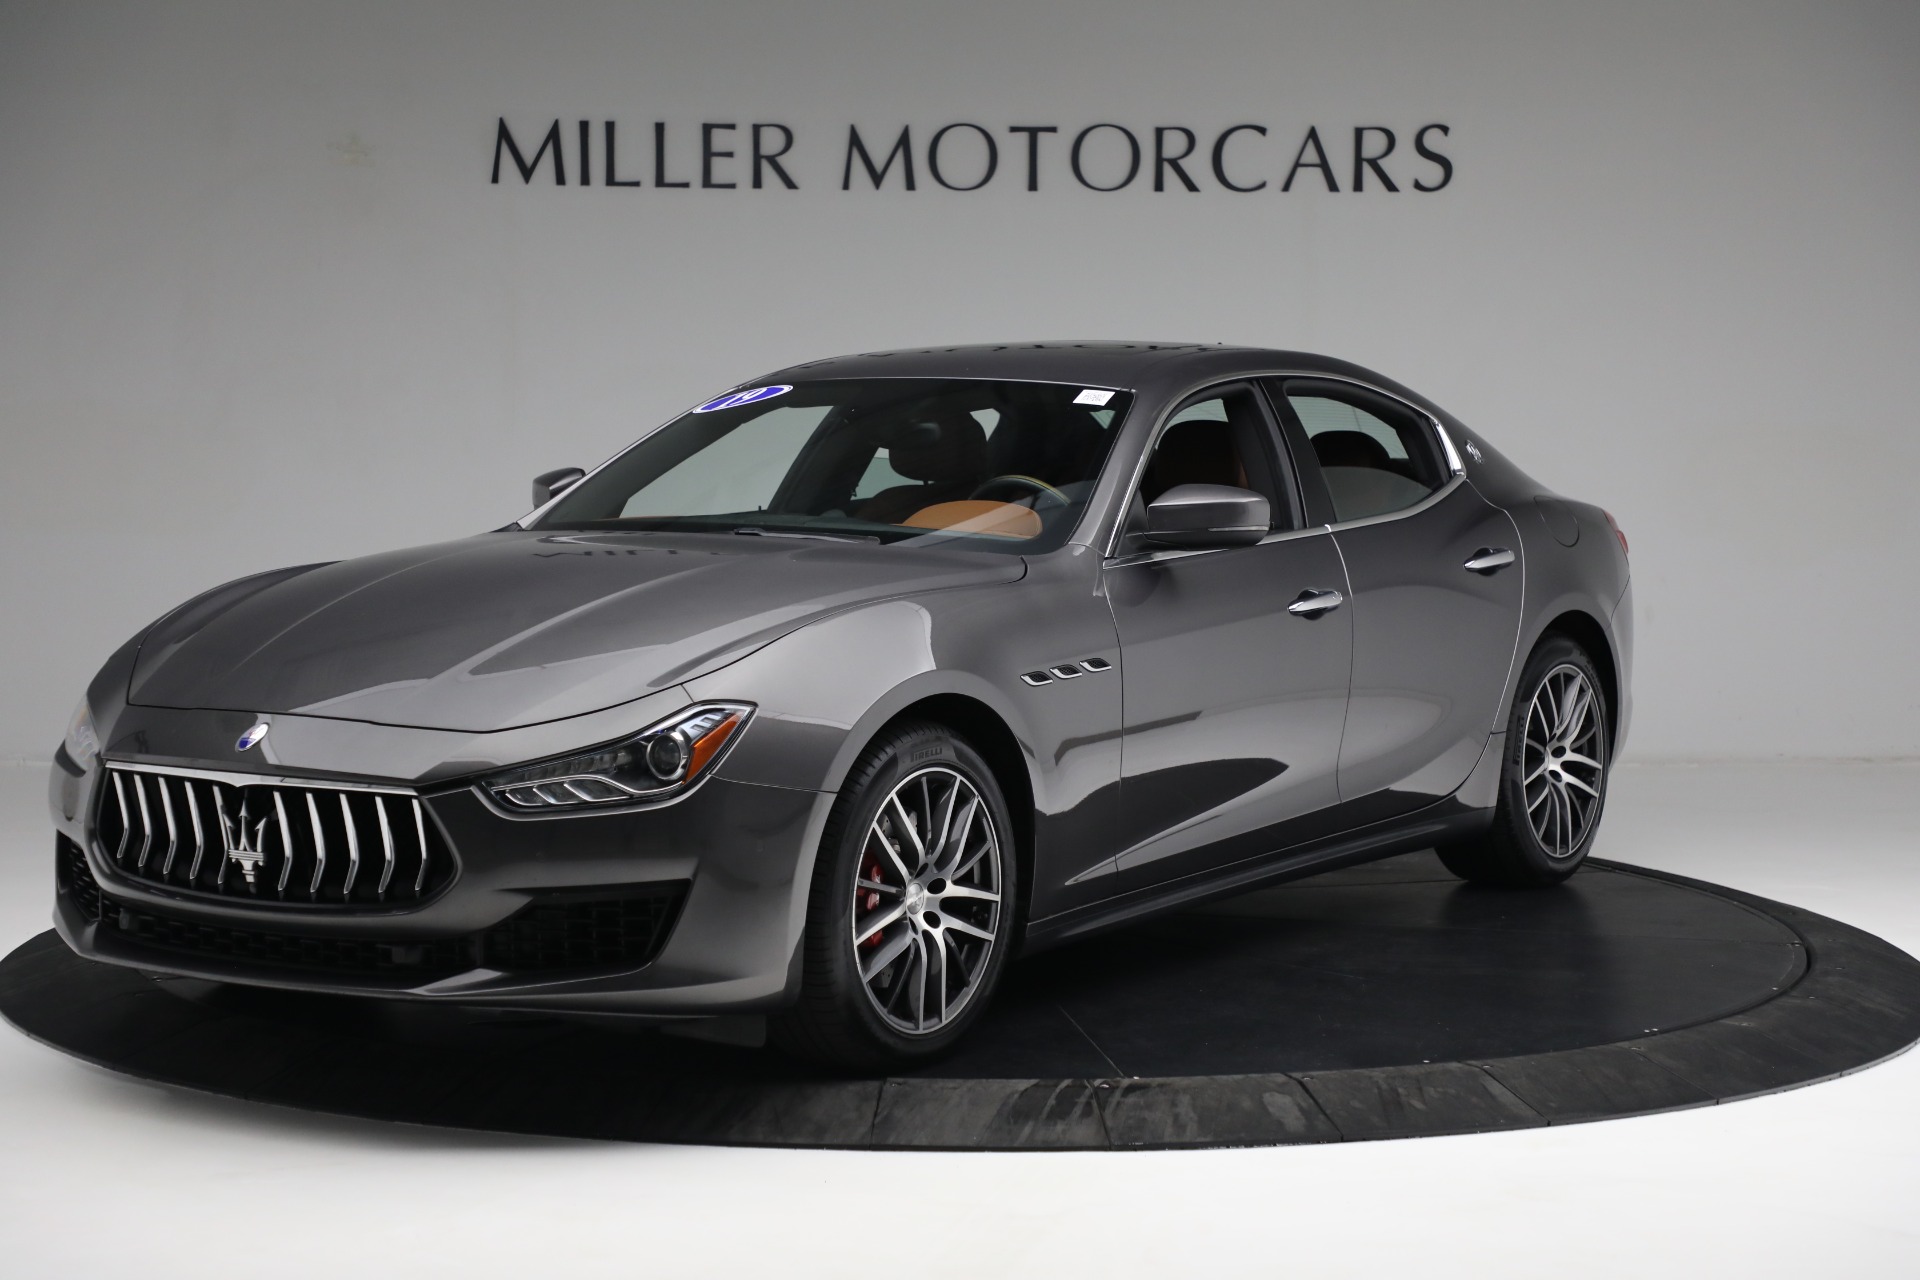 Used 2019 Maserati Ghibli S Q4 for sale $57,900 at Rolls-Royce Motor Cars Greenwich in Greenwich CT 06830 1